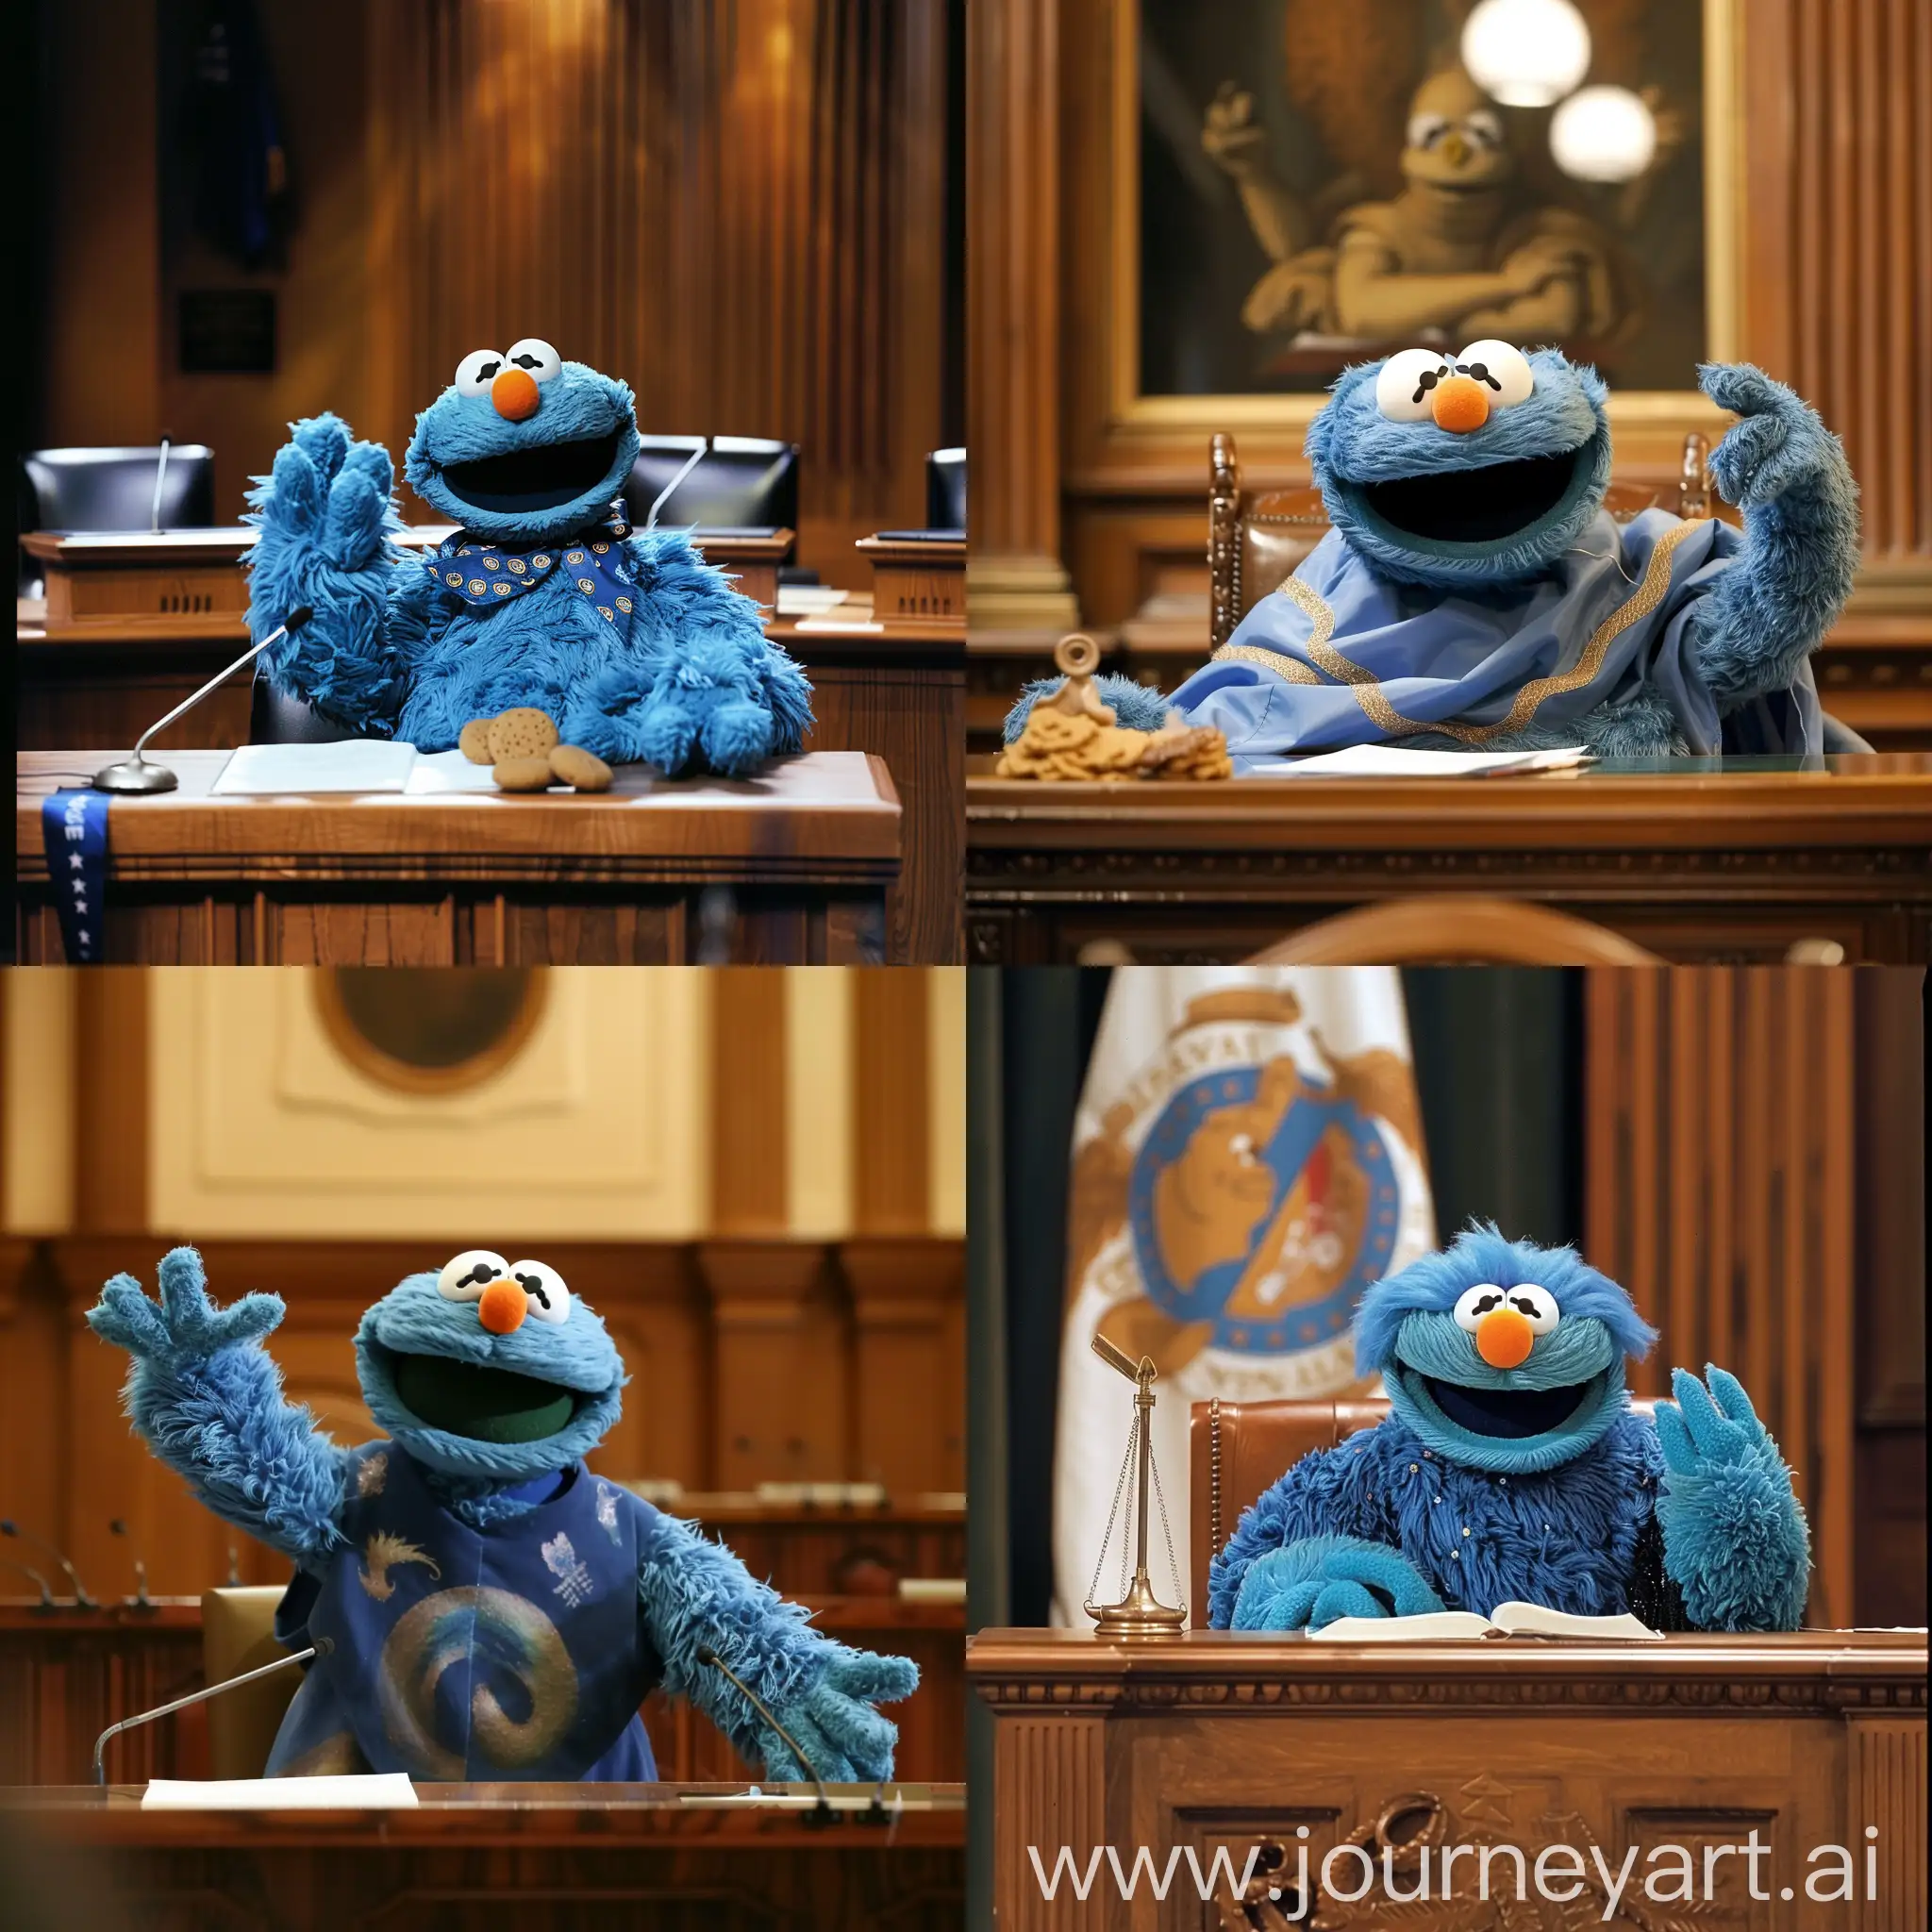 Cookie-Monster-Testifying-at-International-Court-of-Justice-in-The-Hague